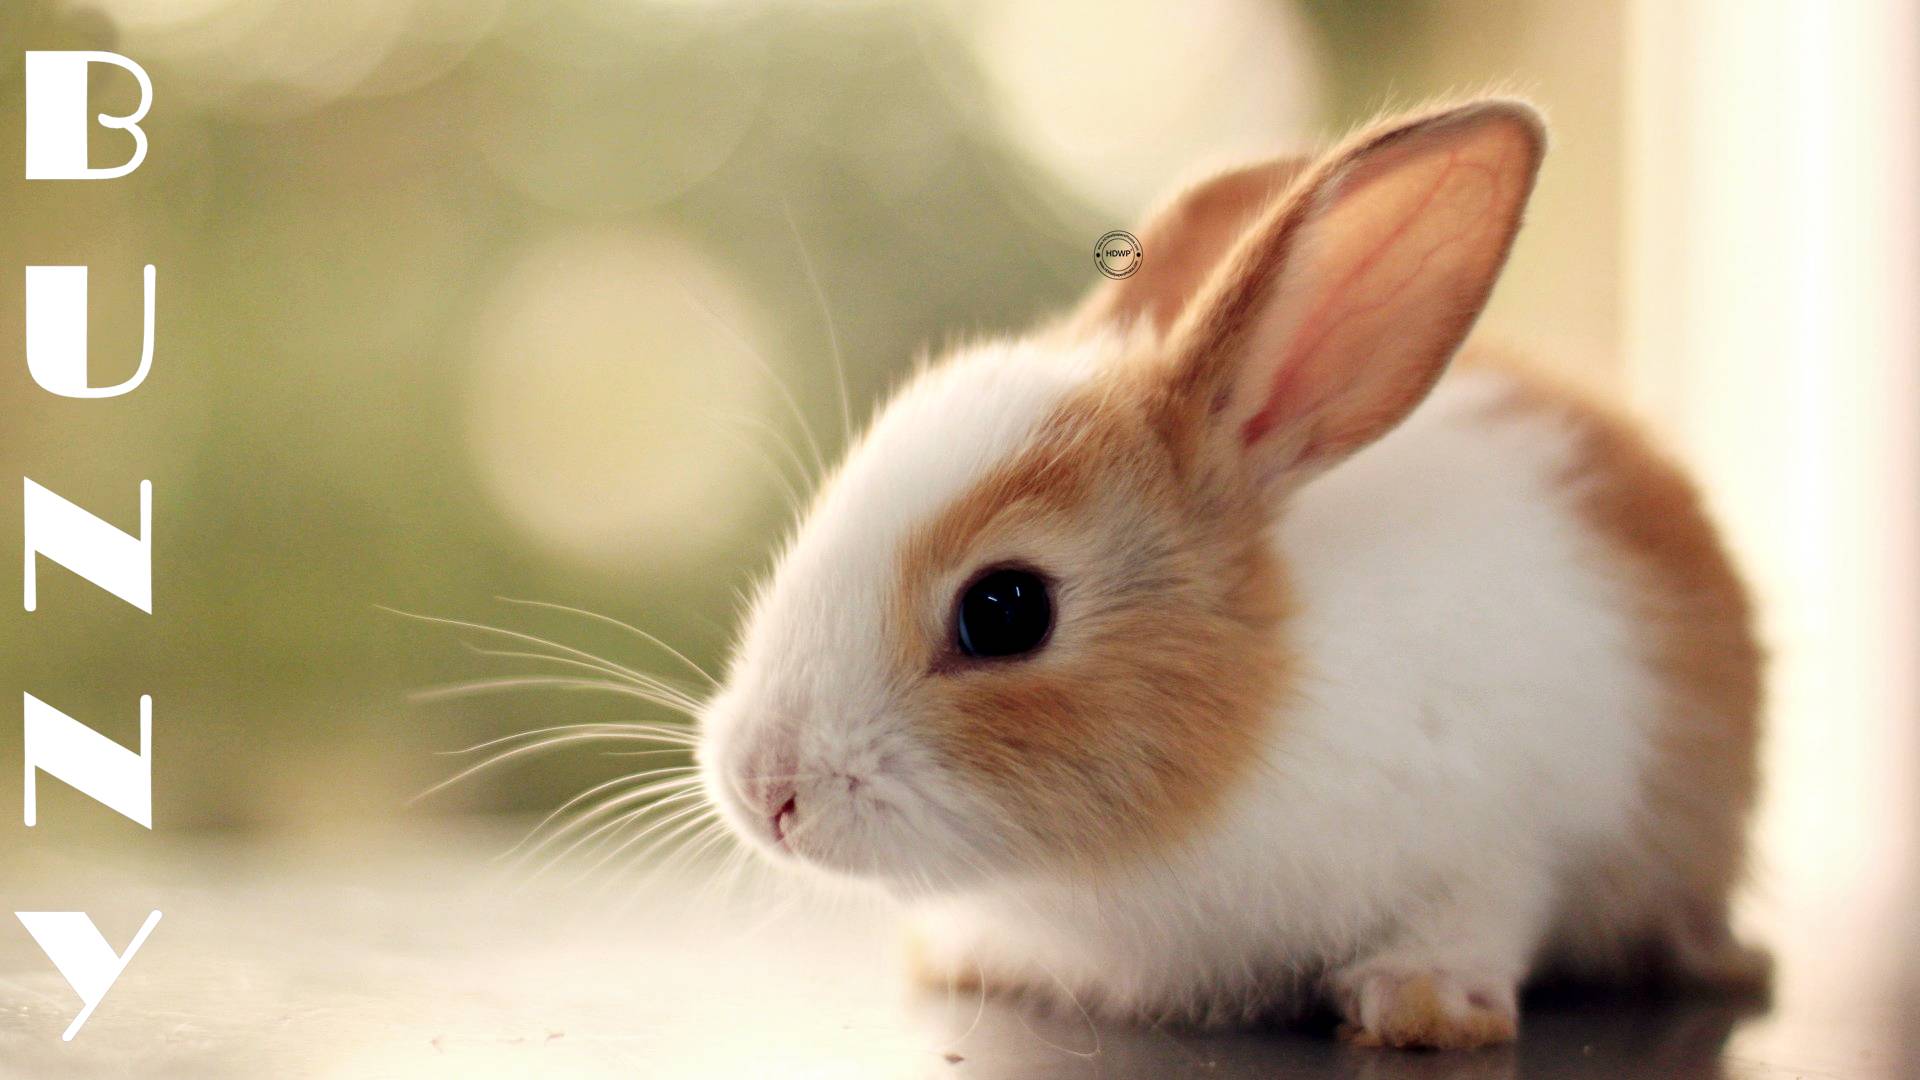 Cute Bunny HD Wallpaper Image Pictures